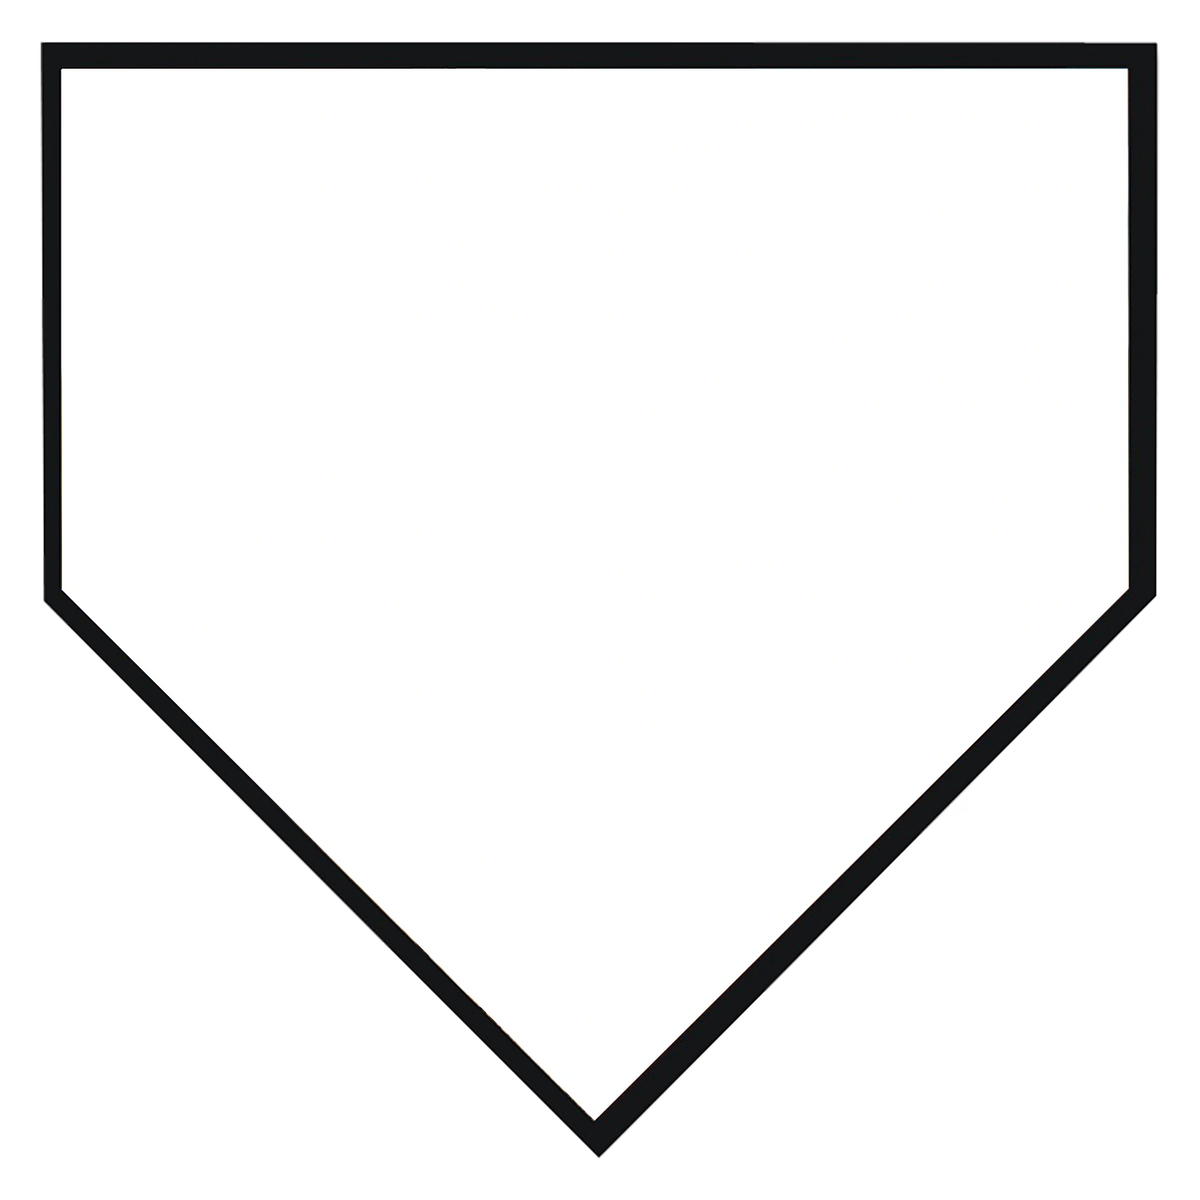 Sublimatable Small Home Plate Plaque with Black Edge